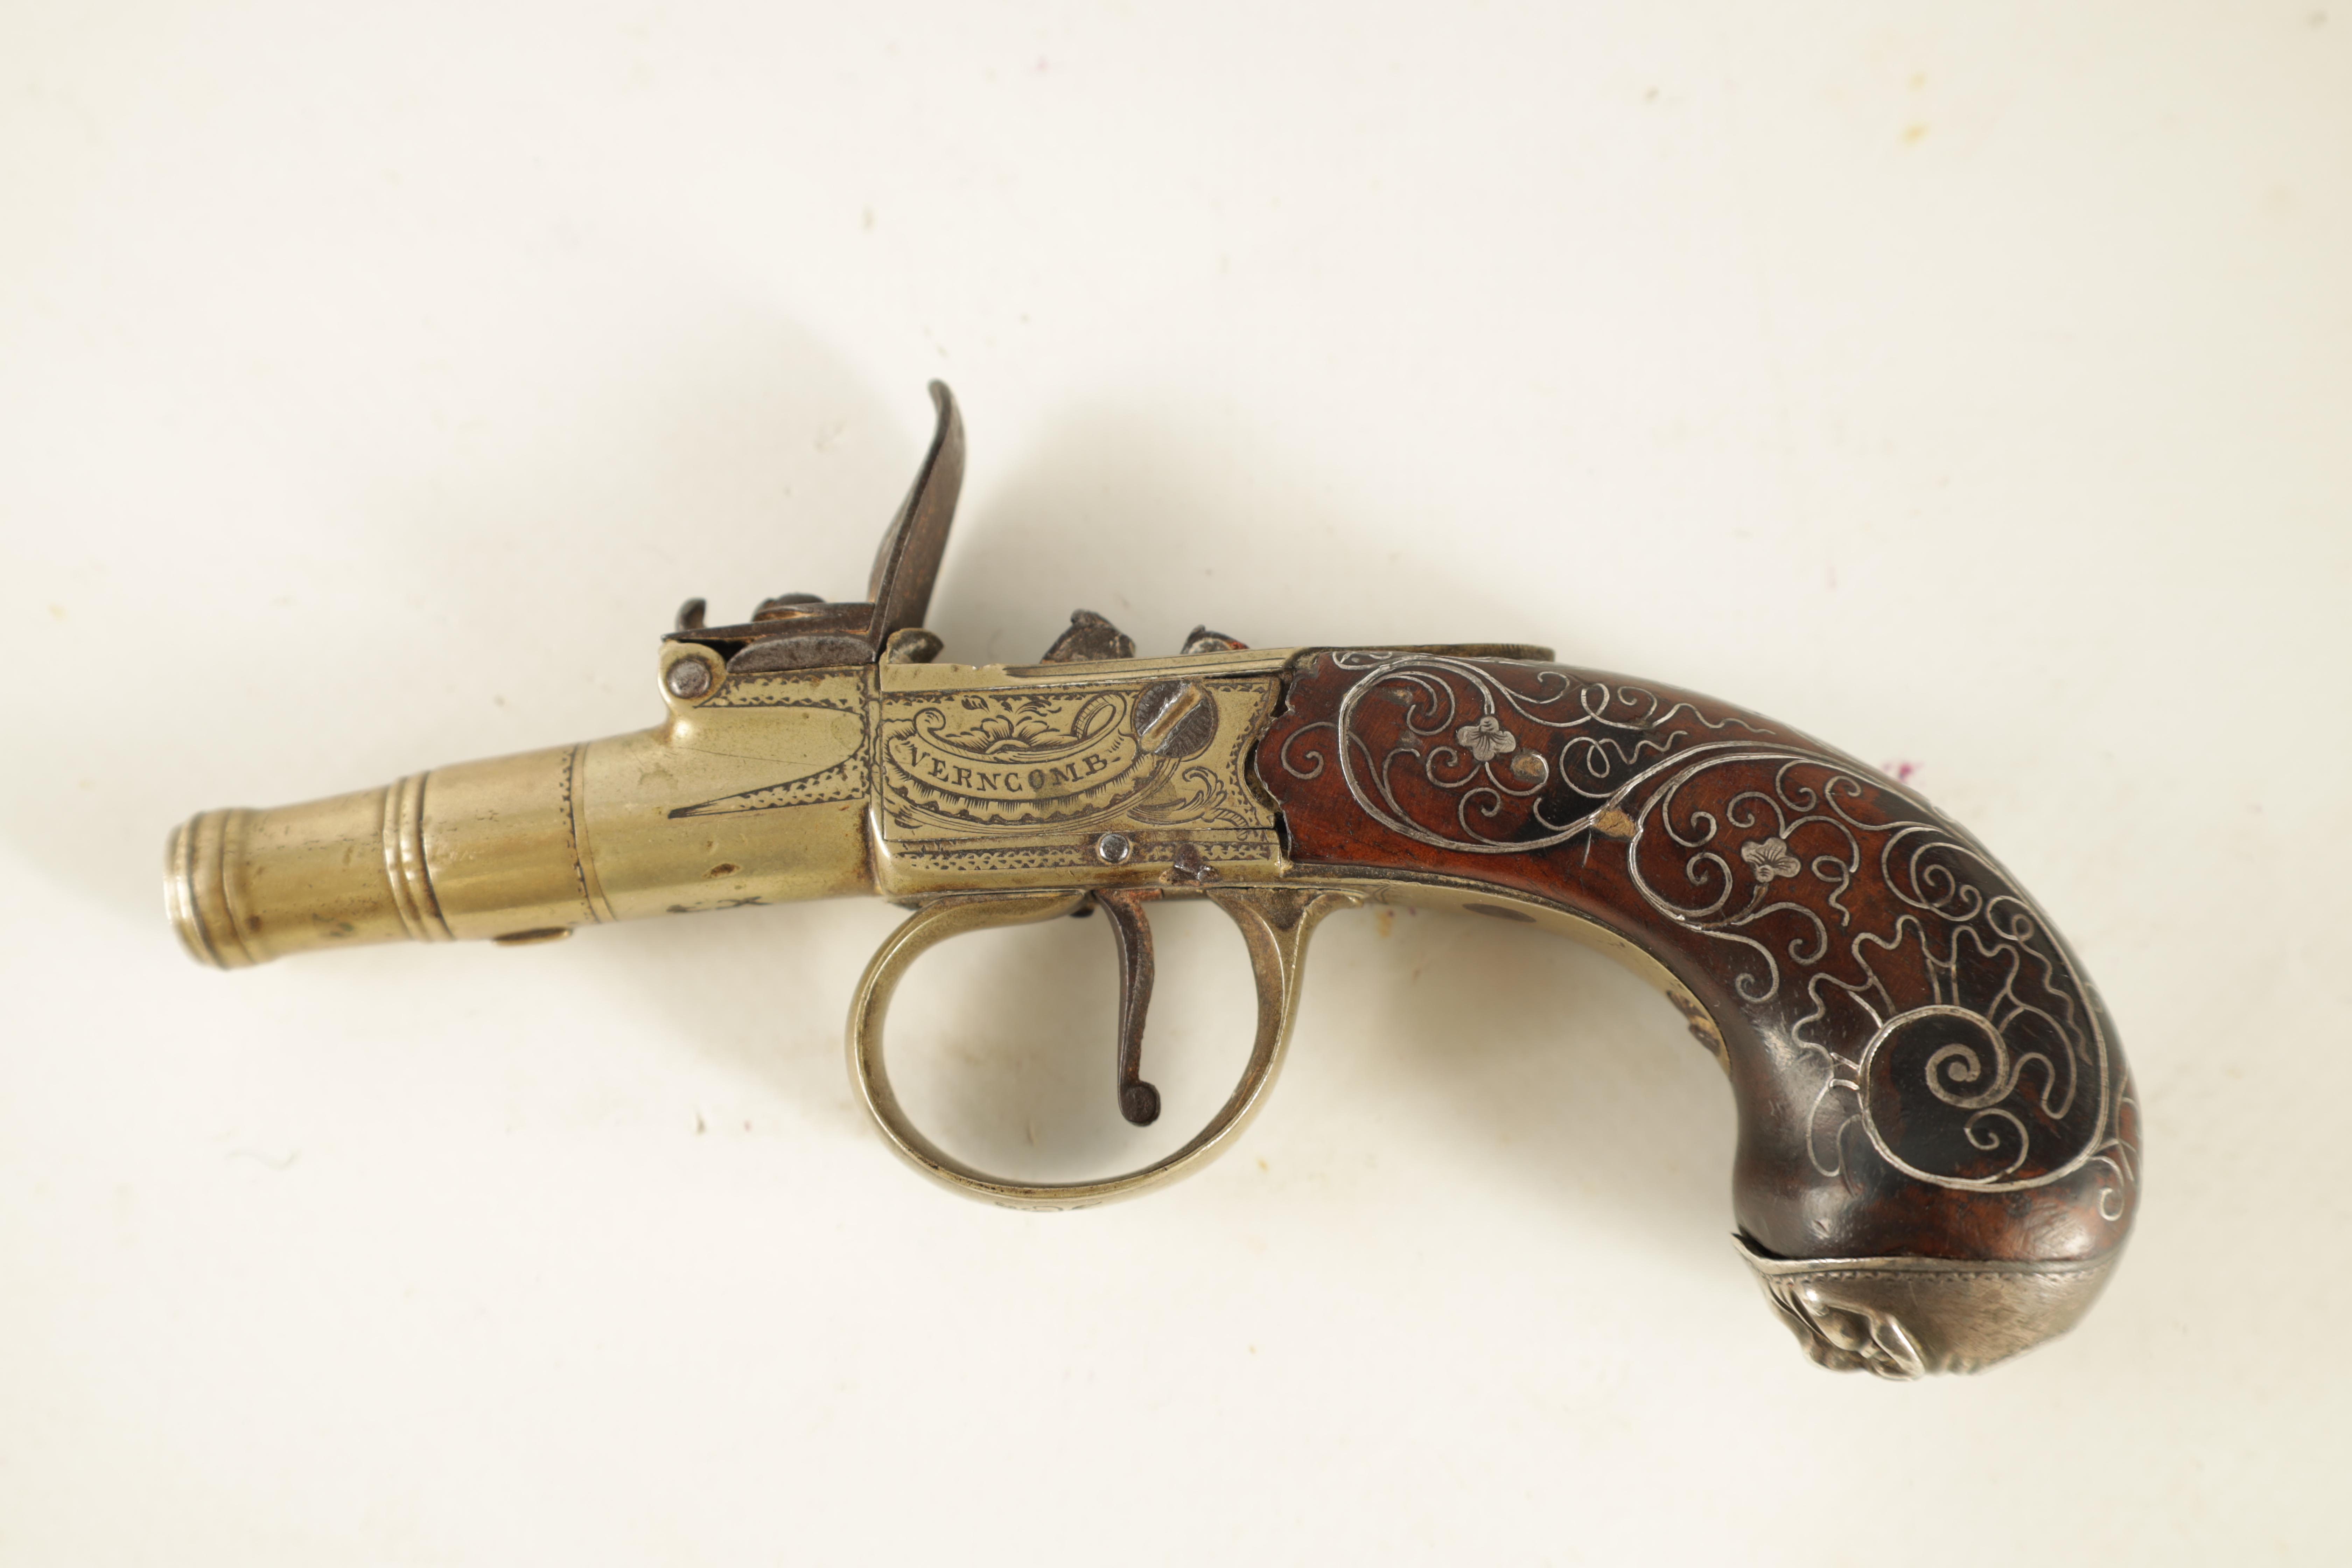 HUGH VERNCOMB, BRISTOL A GEORGE III PACTONG AND WALNUT FLINTLOCK MUFF PISTOL with a cannon-type - Image 8 of 9